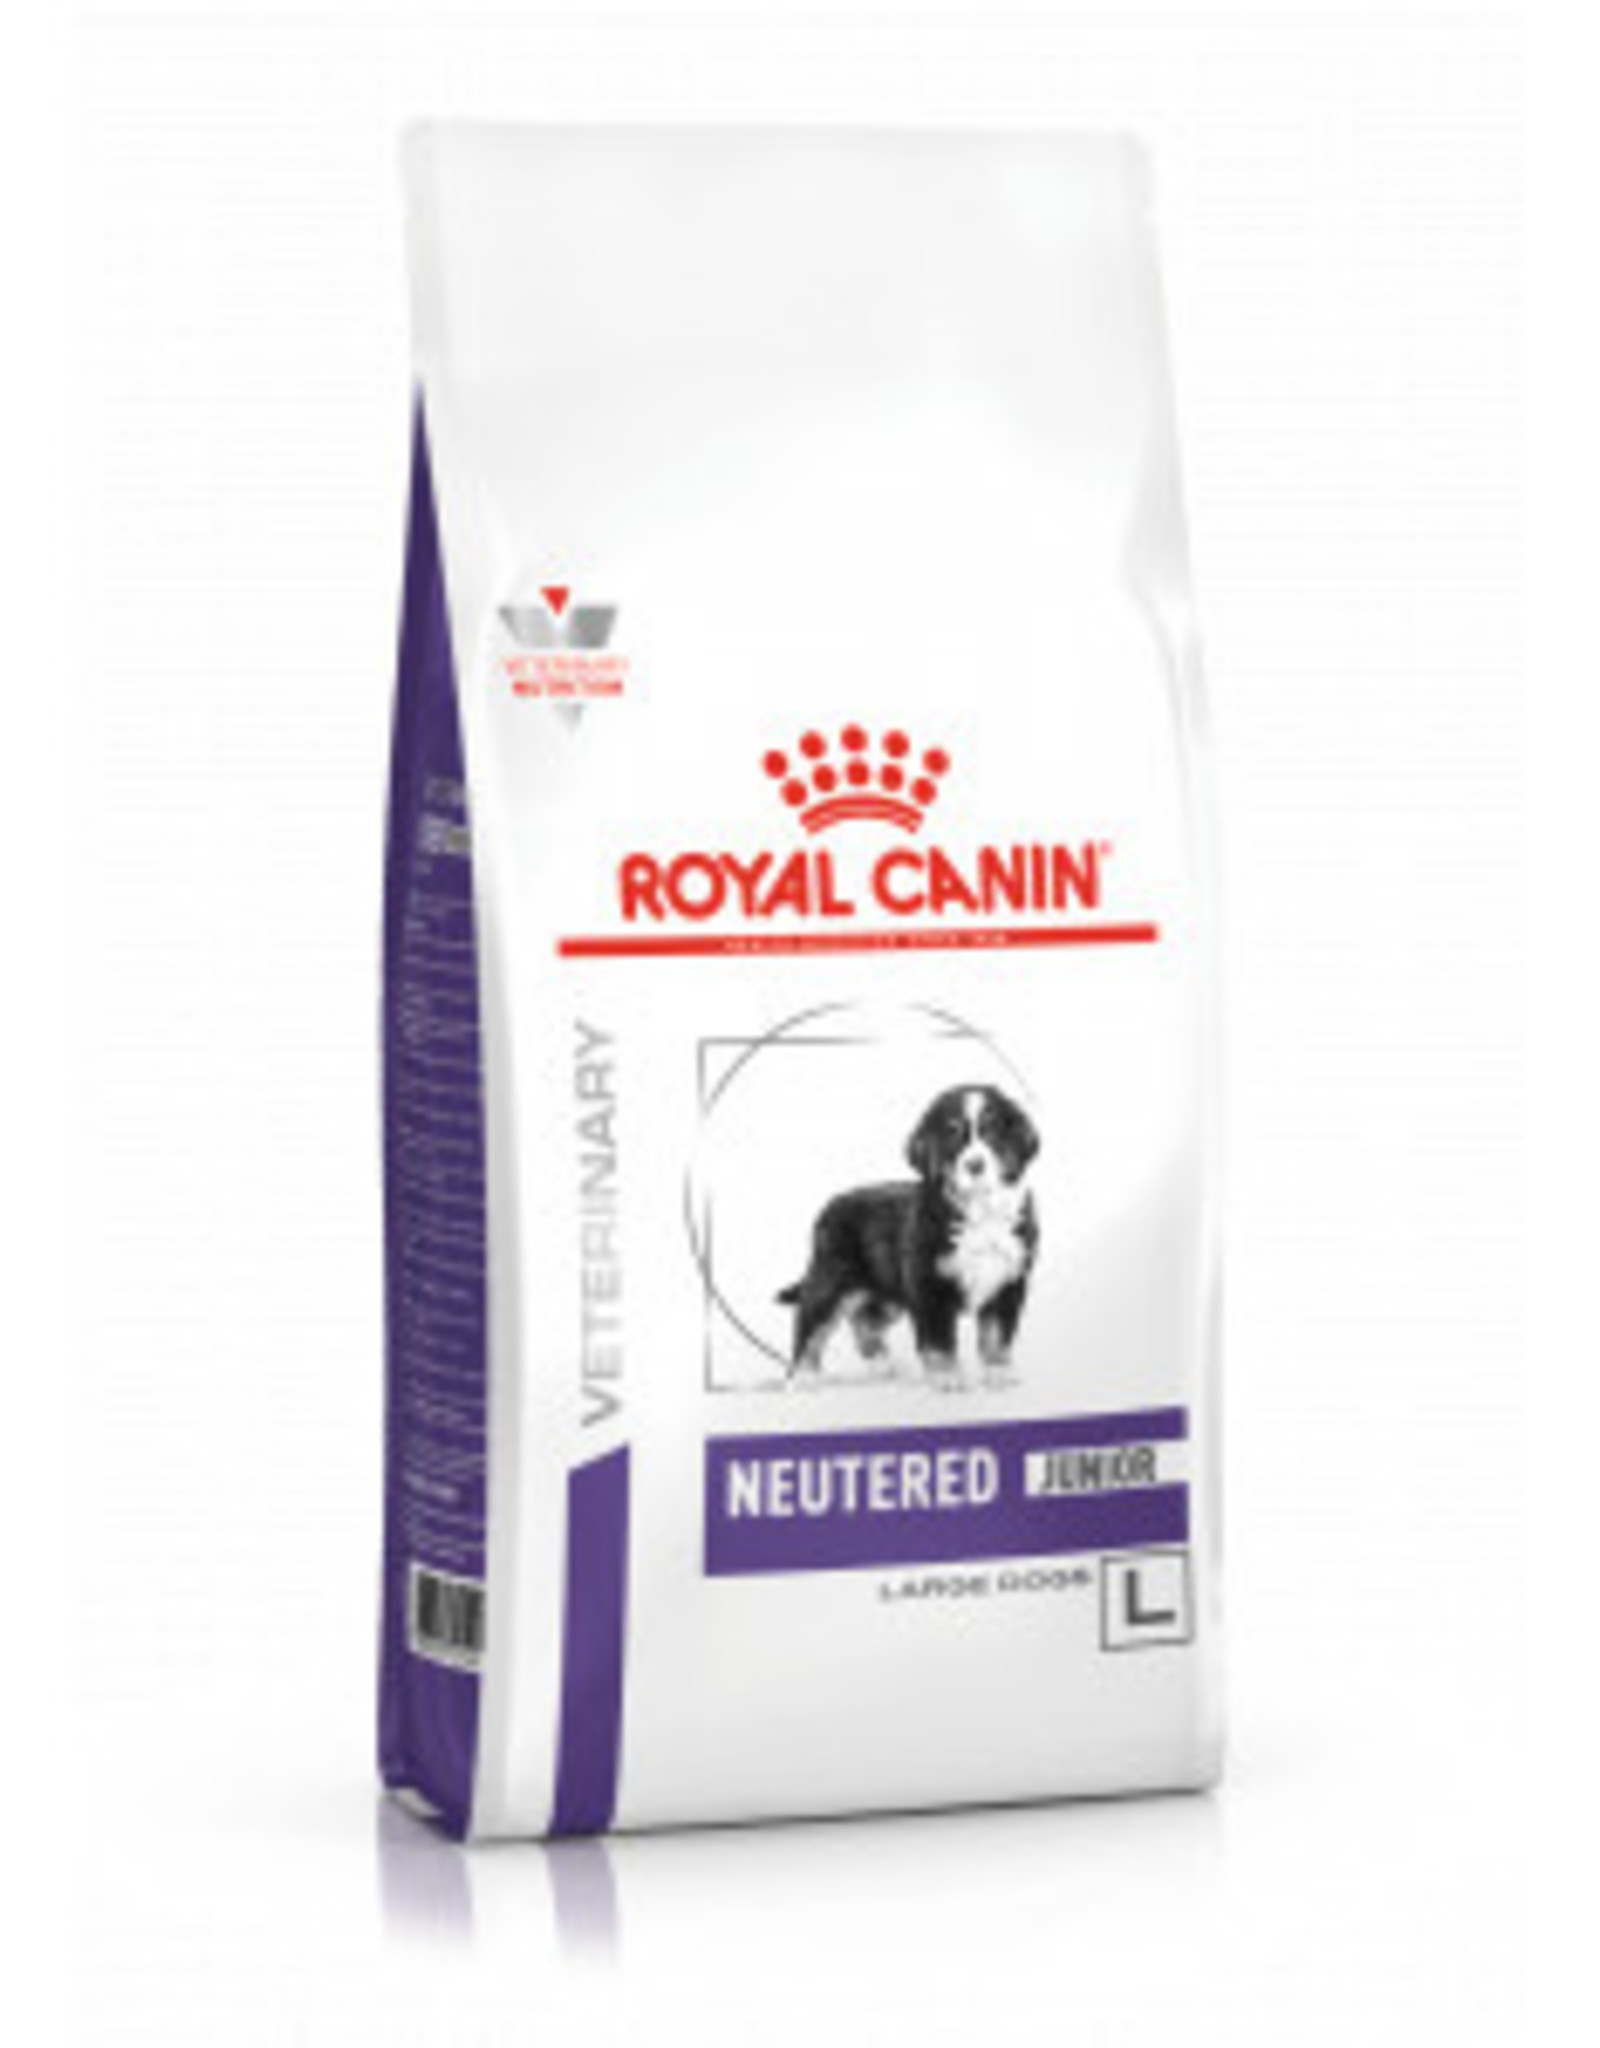 Royal Canin Royal Canin Digest Weight Nt Junior Large Dog 12kg